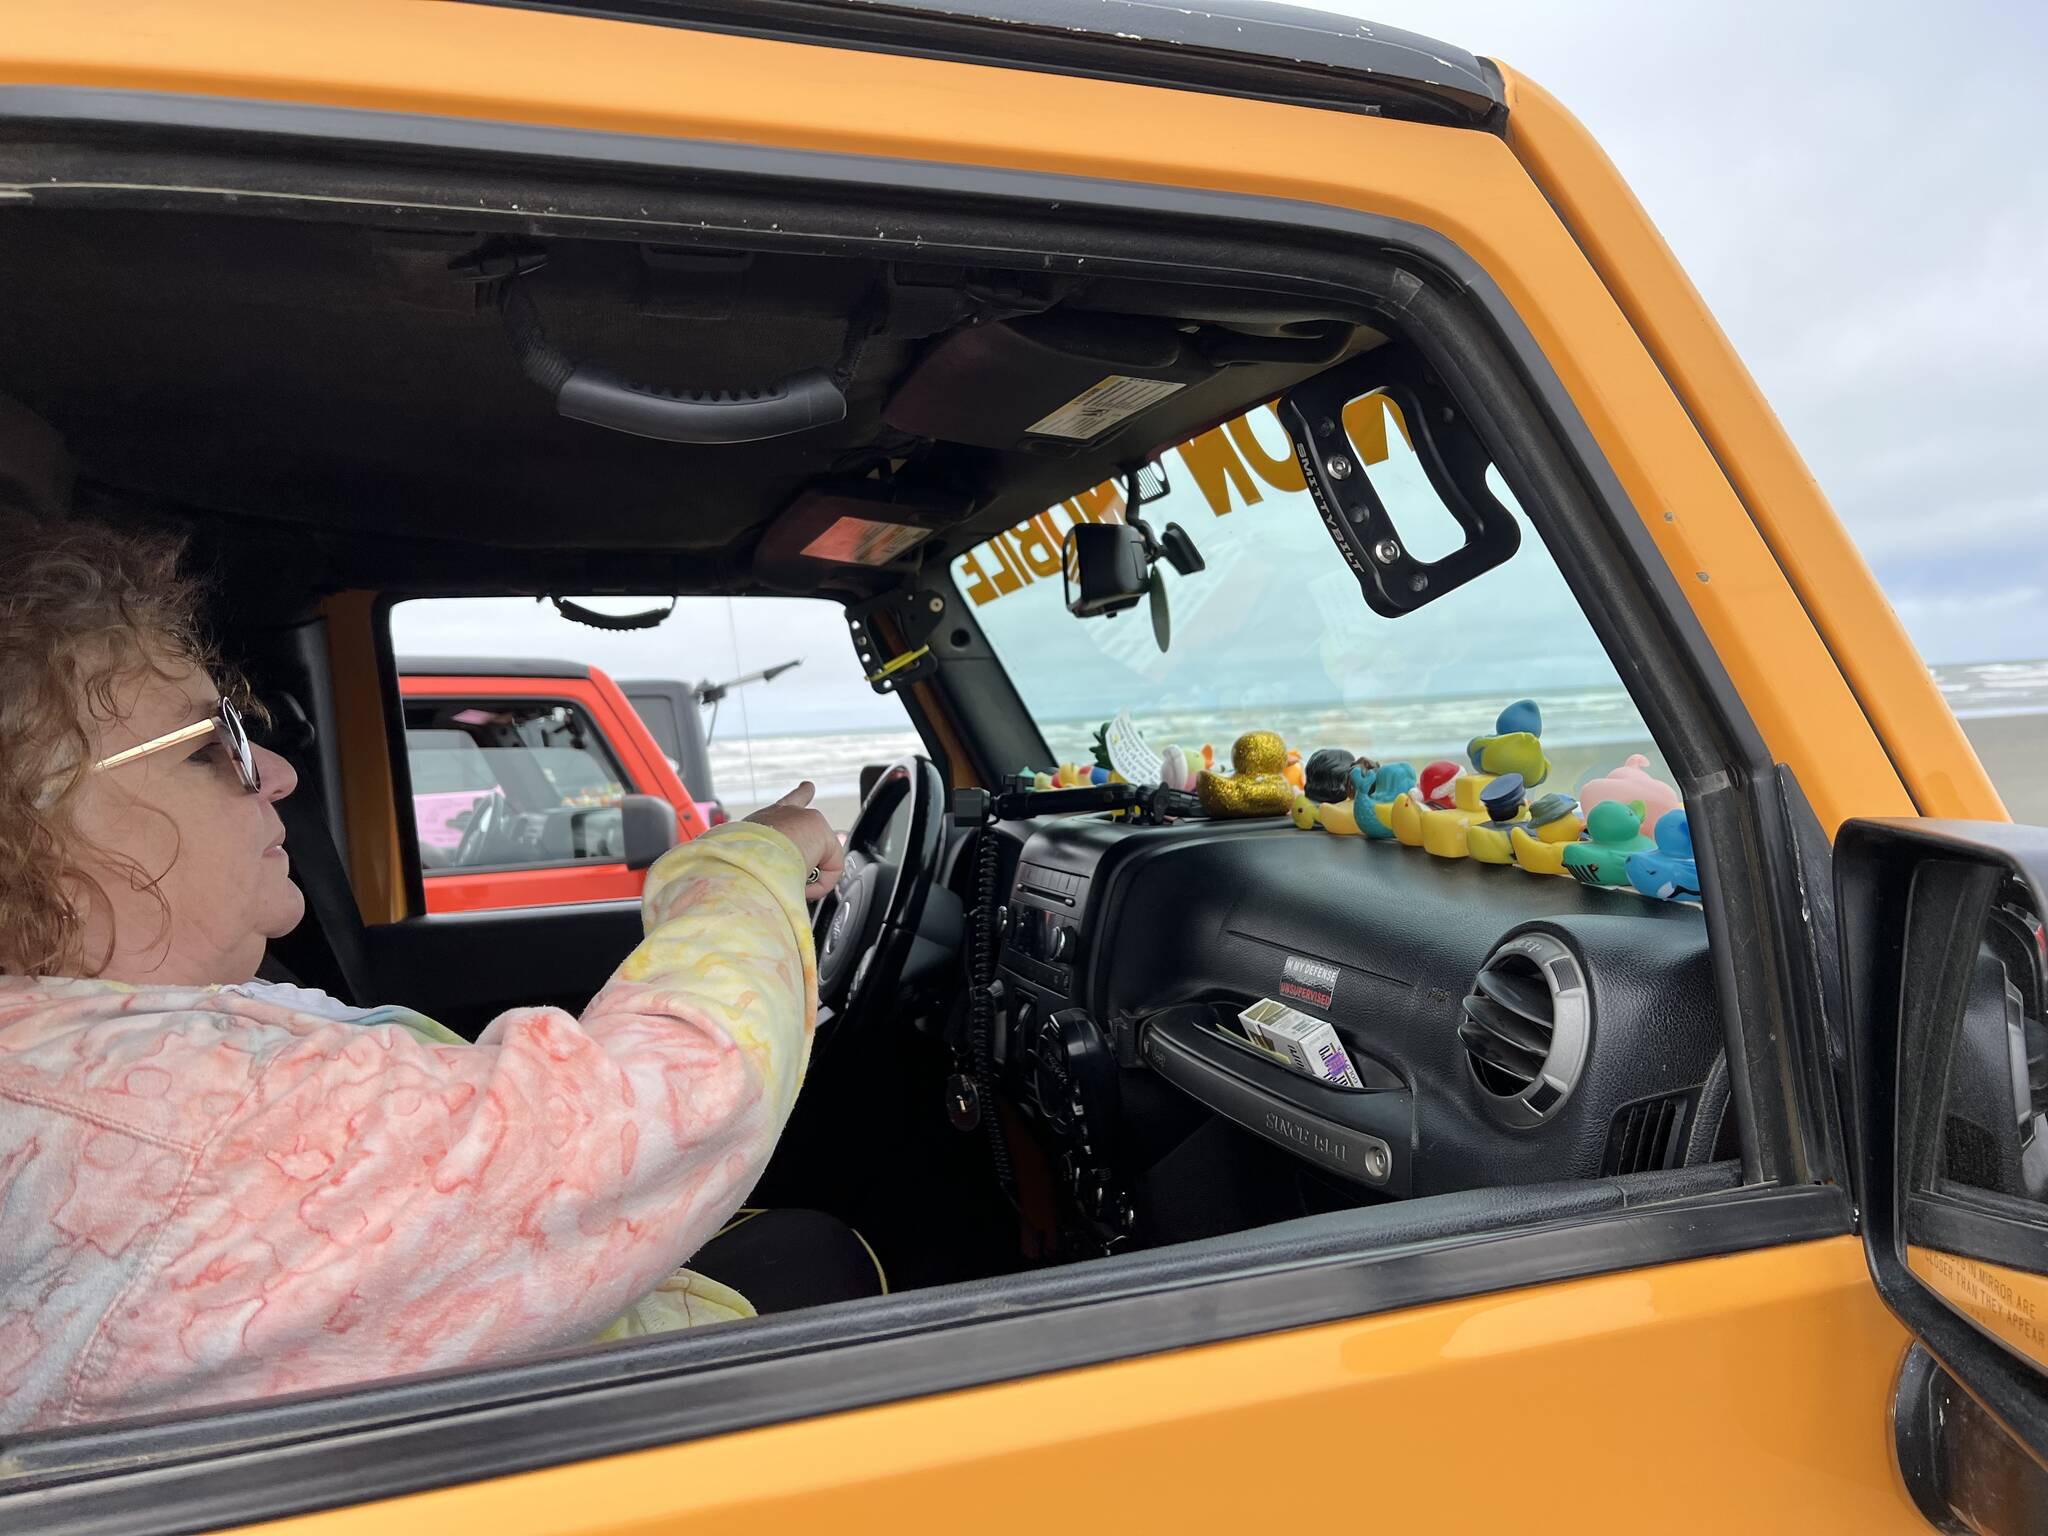 Clayton Franke / The Daily World
Marilyn Stroman sits in her Jeep, named “Dozer the Minion Mobile,” on the beach at Chance A La Mer on Saturday, May 20.